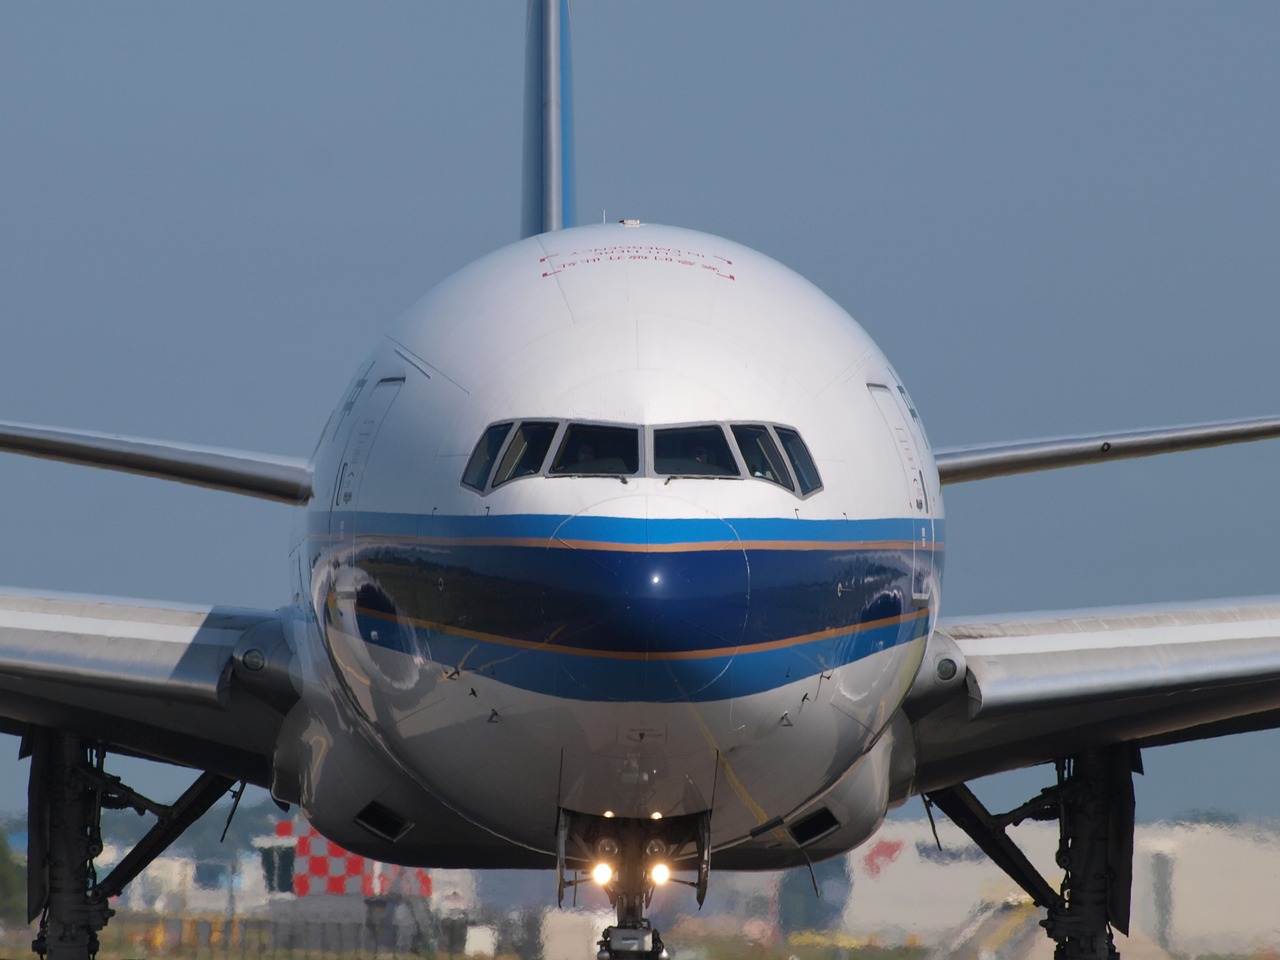 china southern airlines boeing 777 aircraft free photo